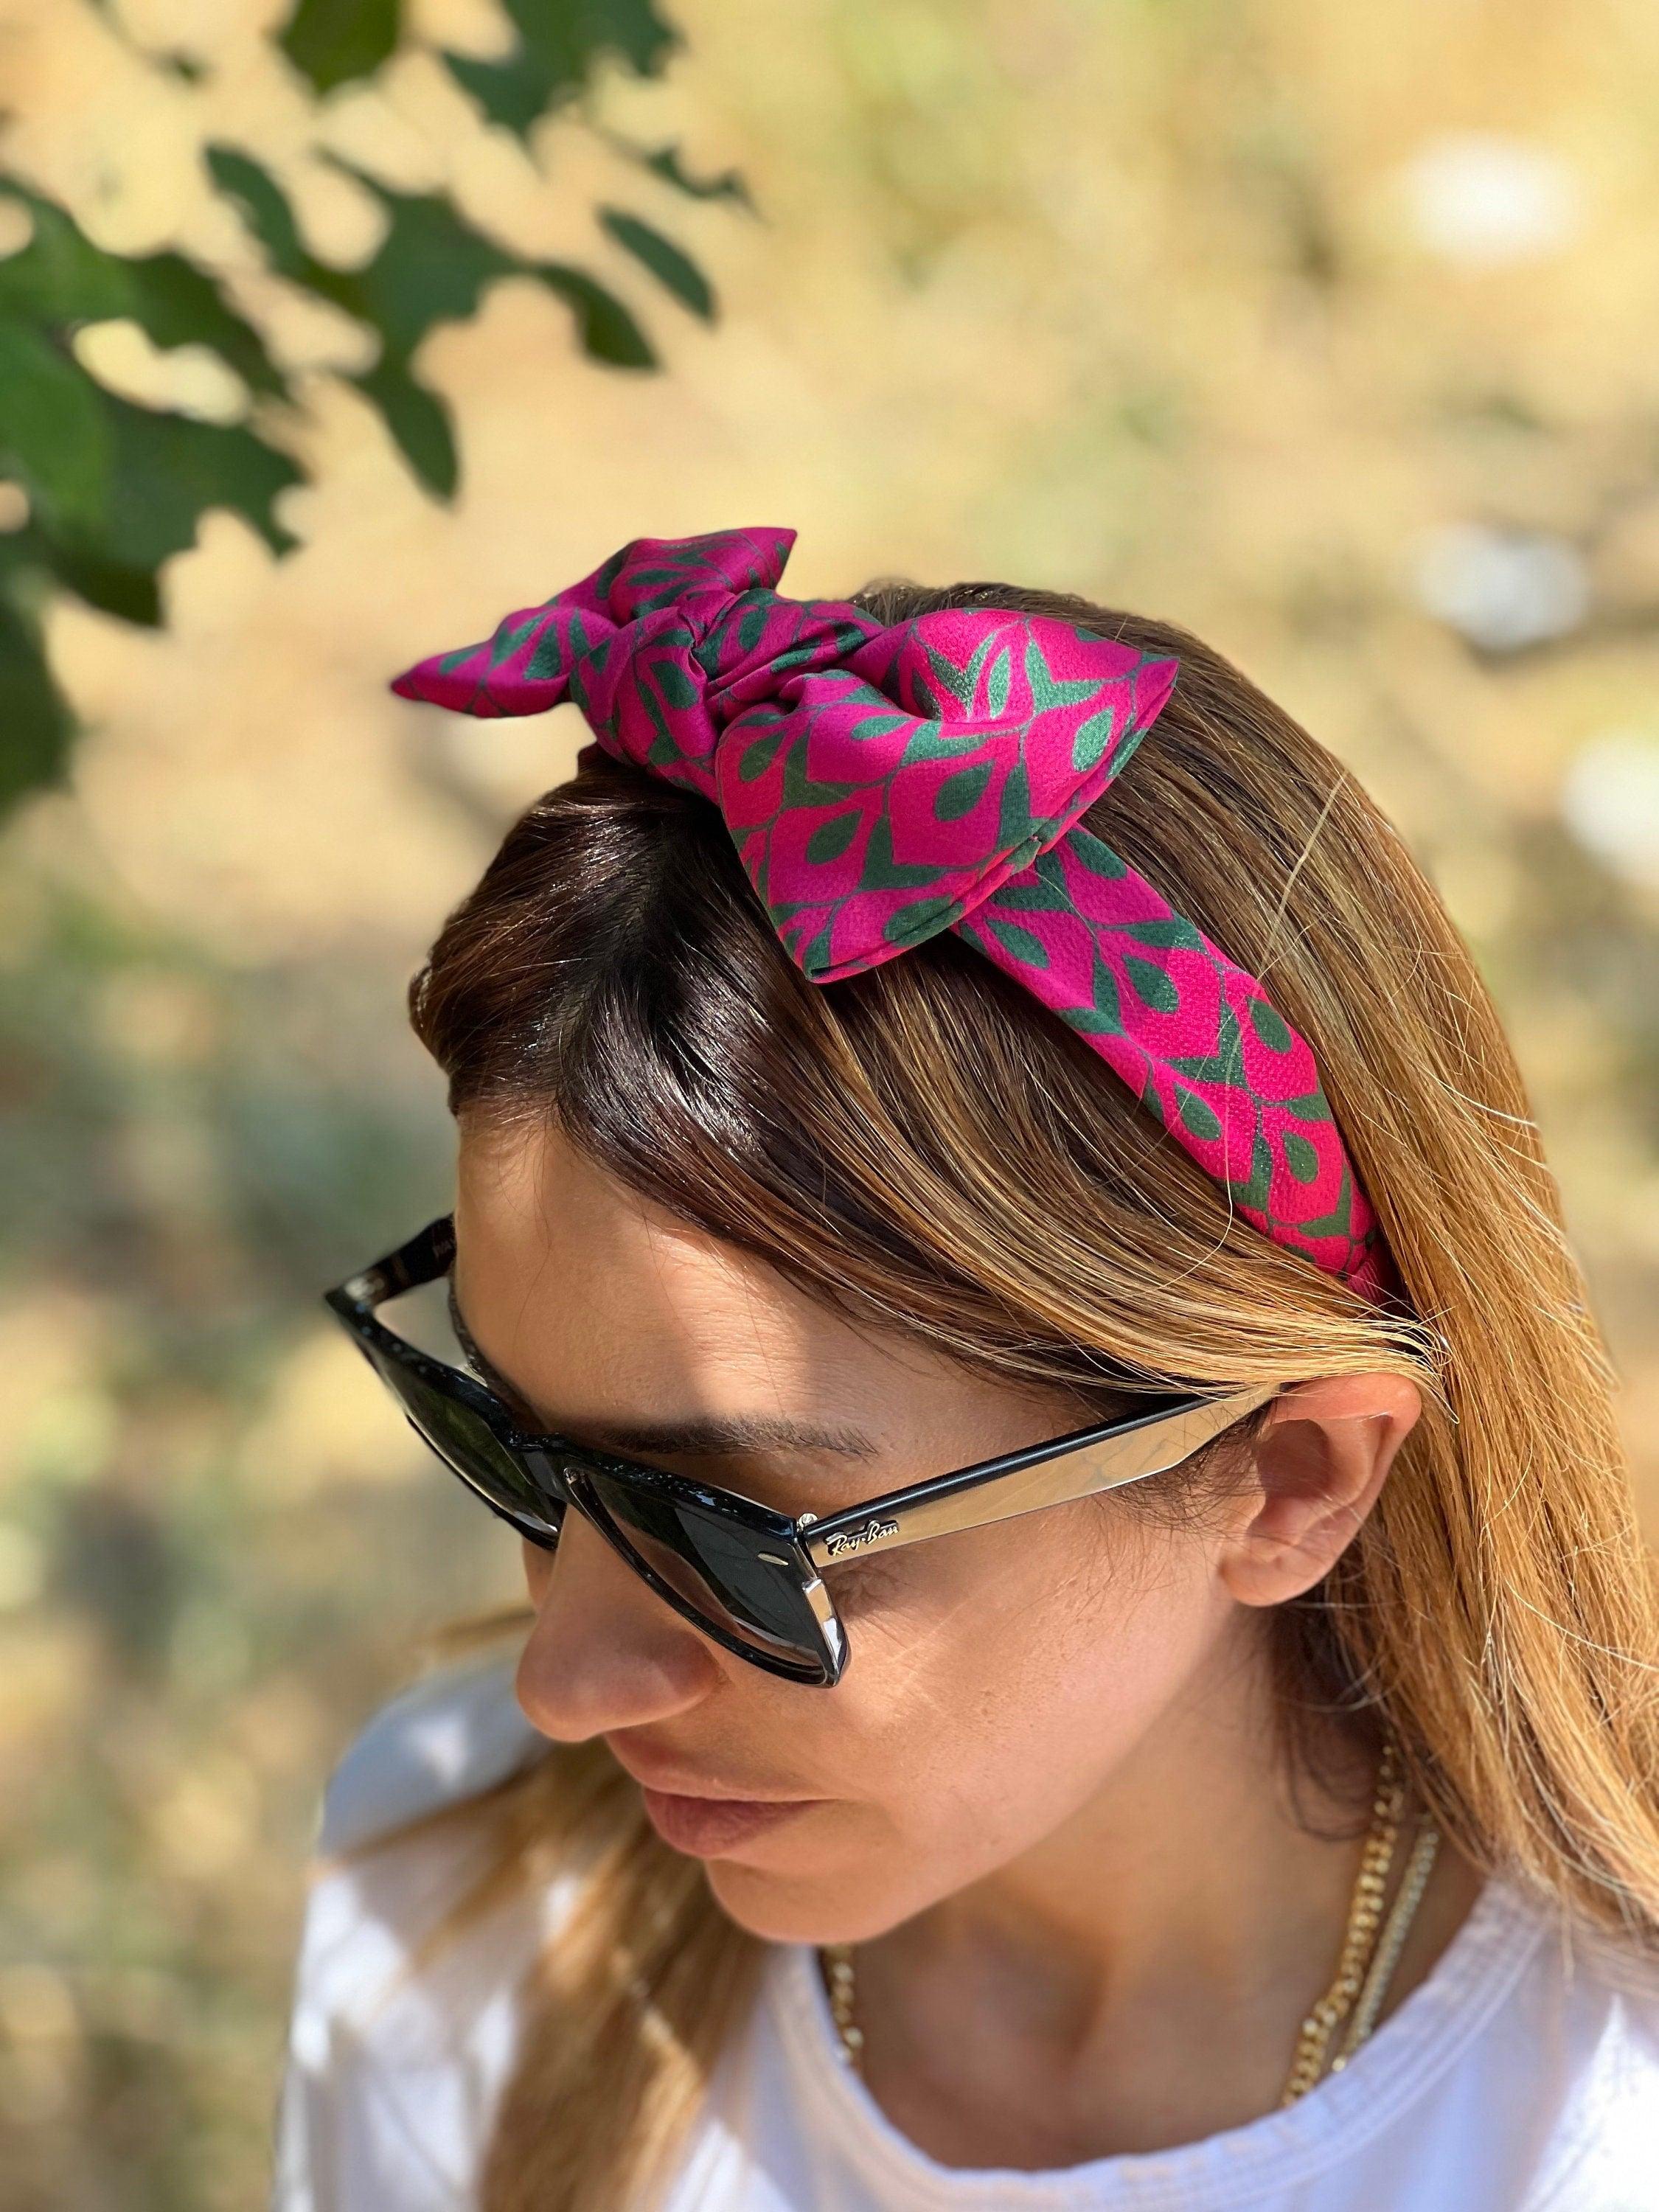 Delicate Silk Bow Headband in Pink and Green: Hair Tie for Women and Girls, Dark Pink Patterned Turban Hairband without Padding available at Moyoni Design